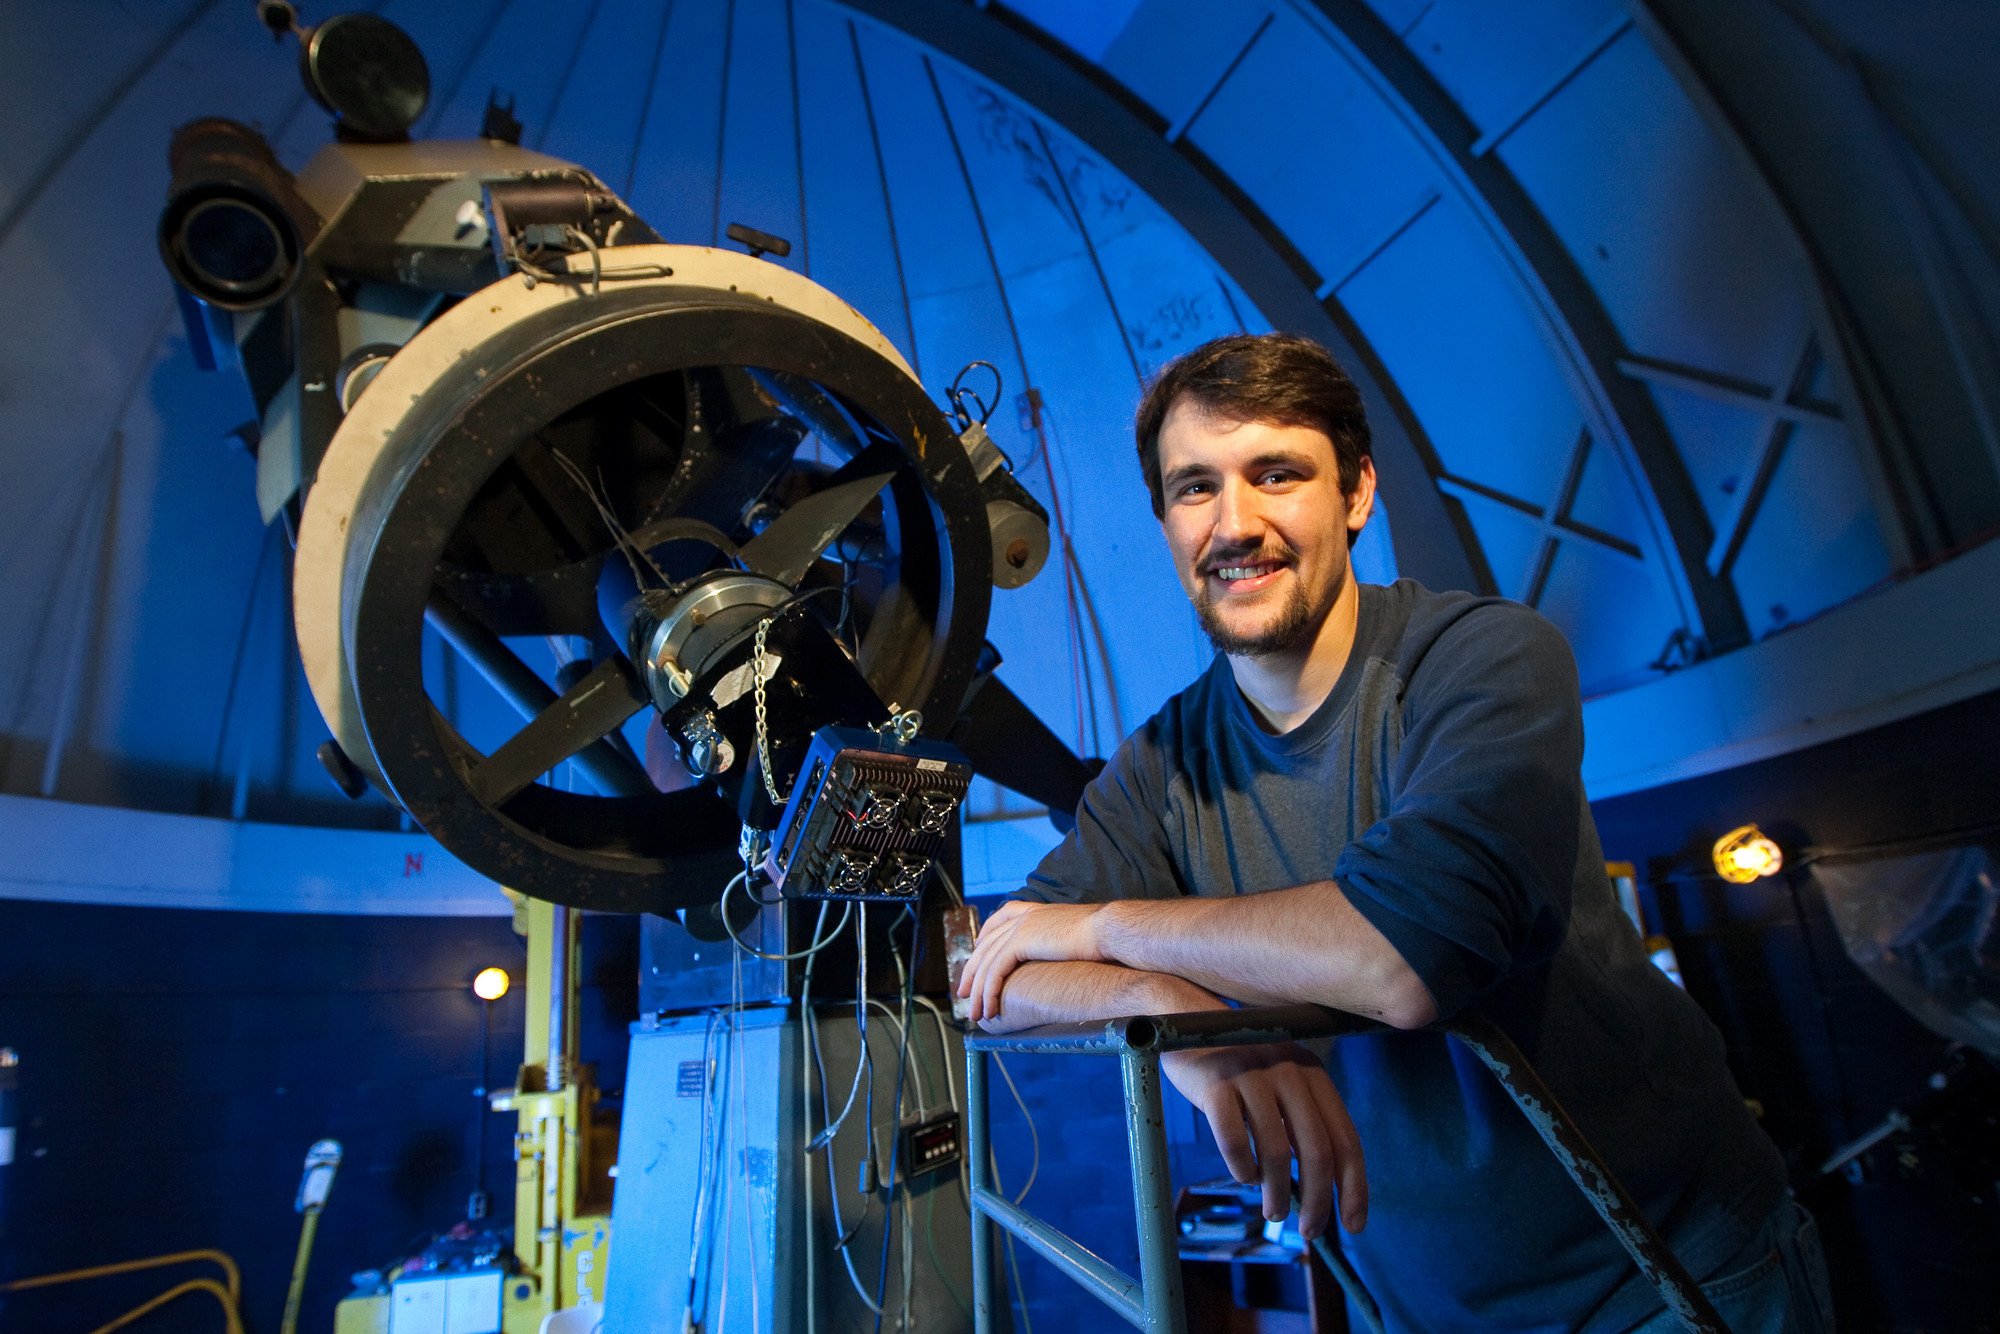 UD Grad student next to the telescope at Mt. Cuba Astronomical Observatory in Greenville, Del. Photo by Kevin Quinlan.